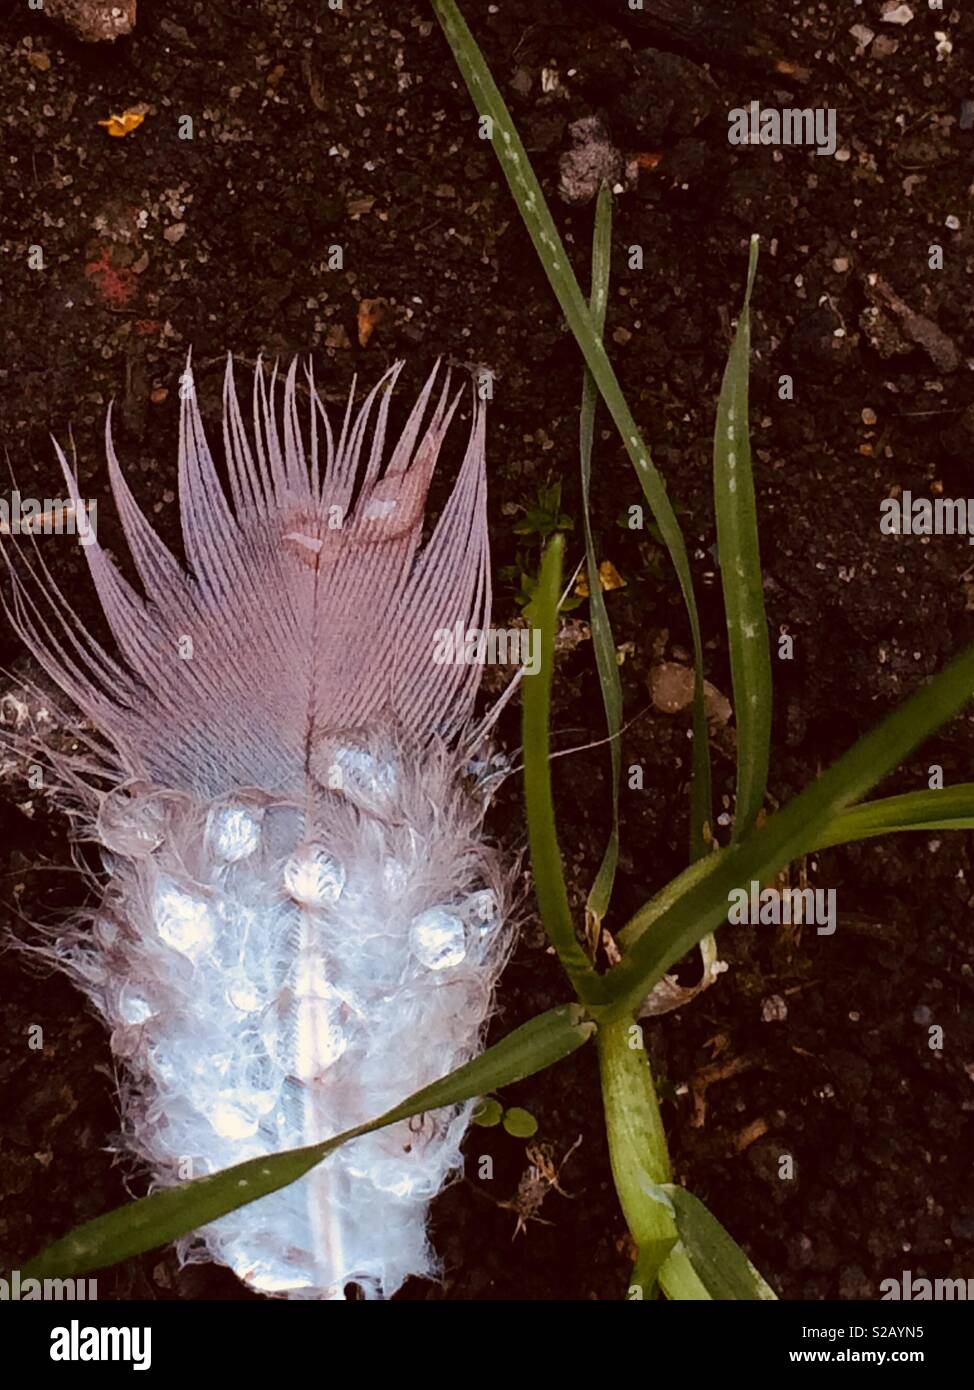 Feather, grass and raindrops Stock Photo